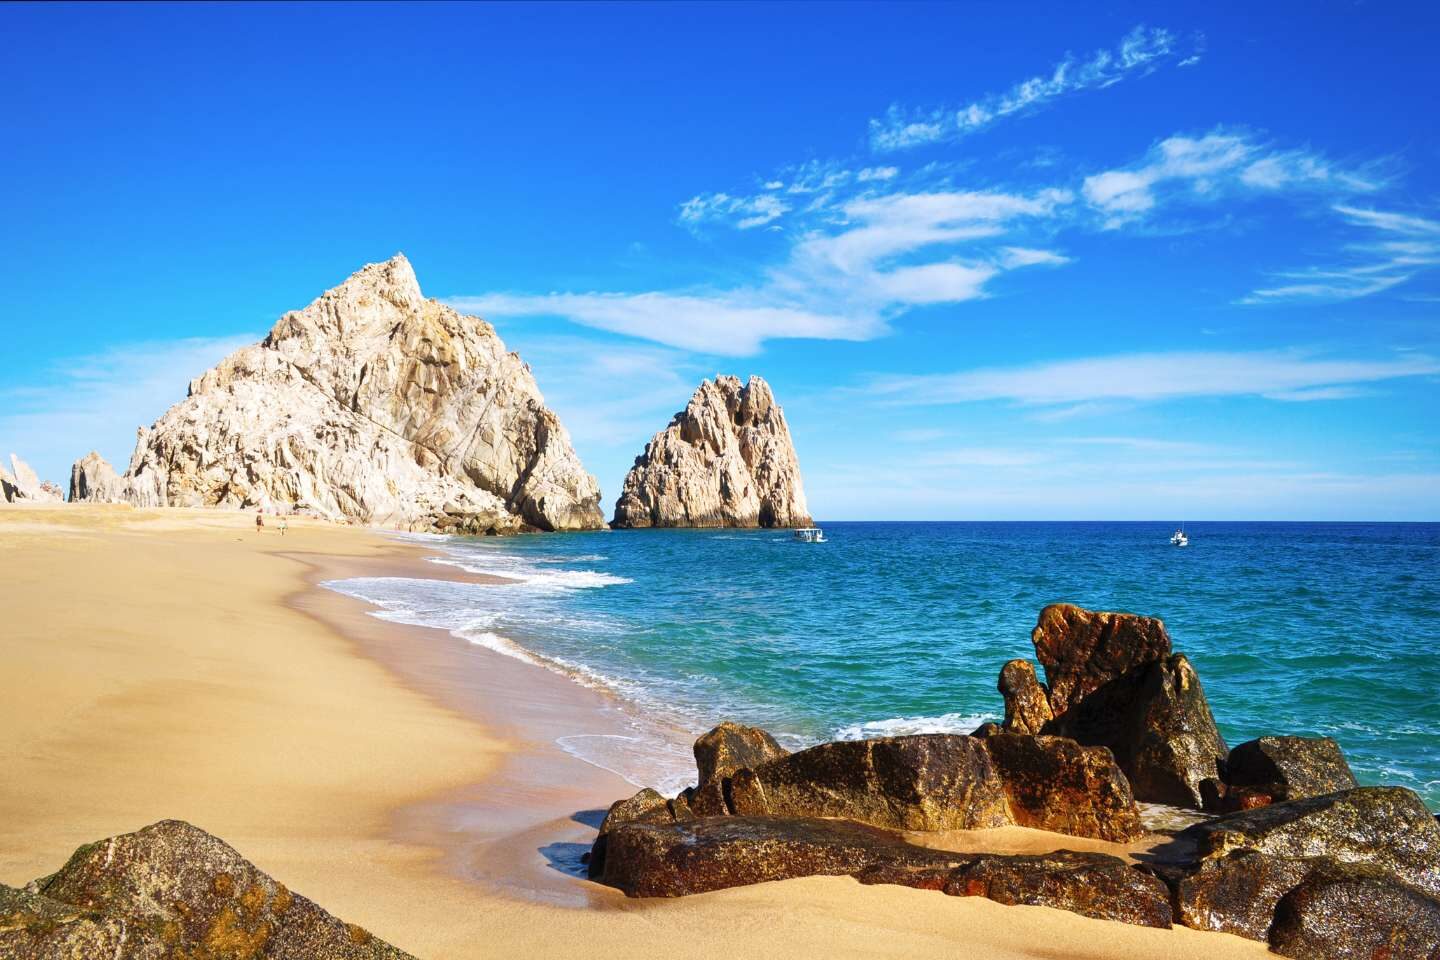 Warm weather in Cabo San Lucas, Mexico